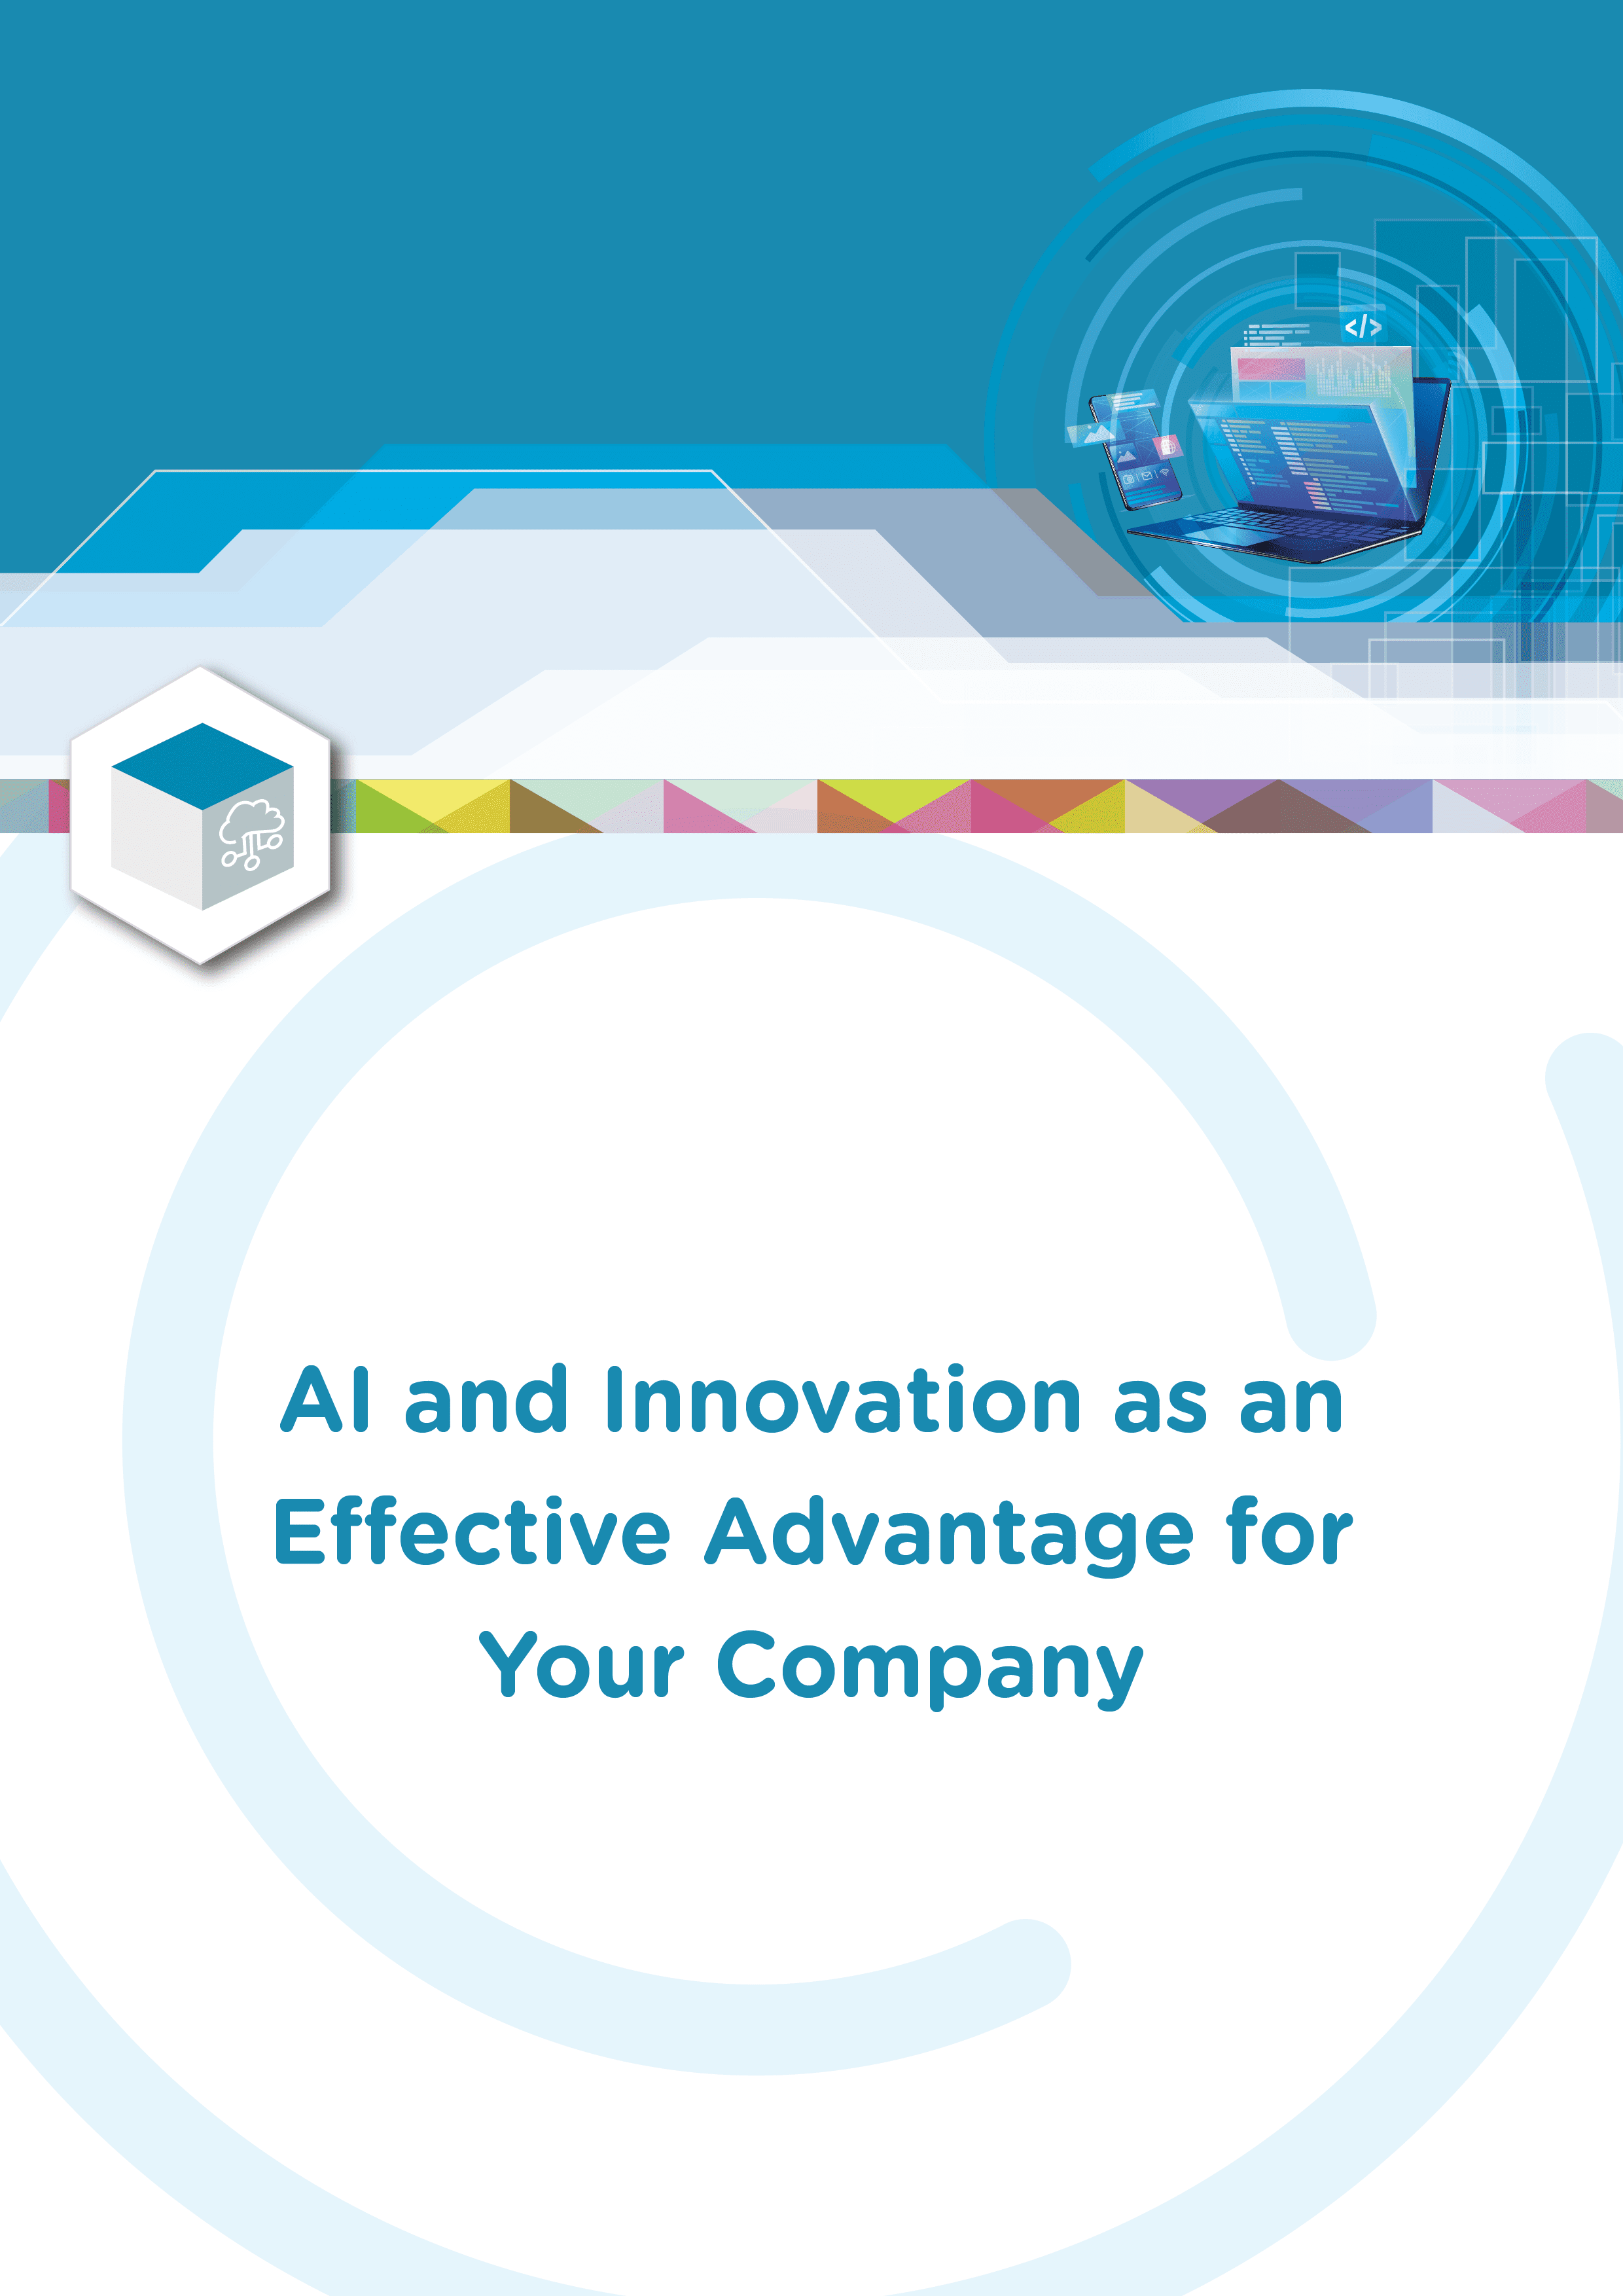 AI and Innovation as an Effective Advantage for Your Company